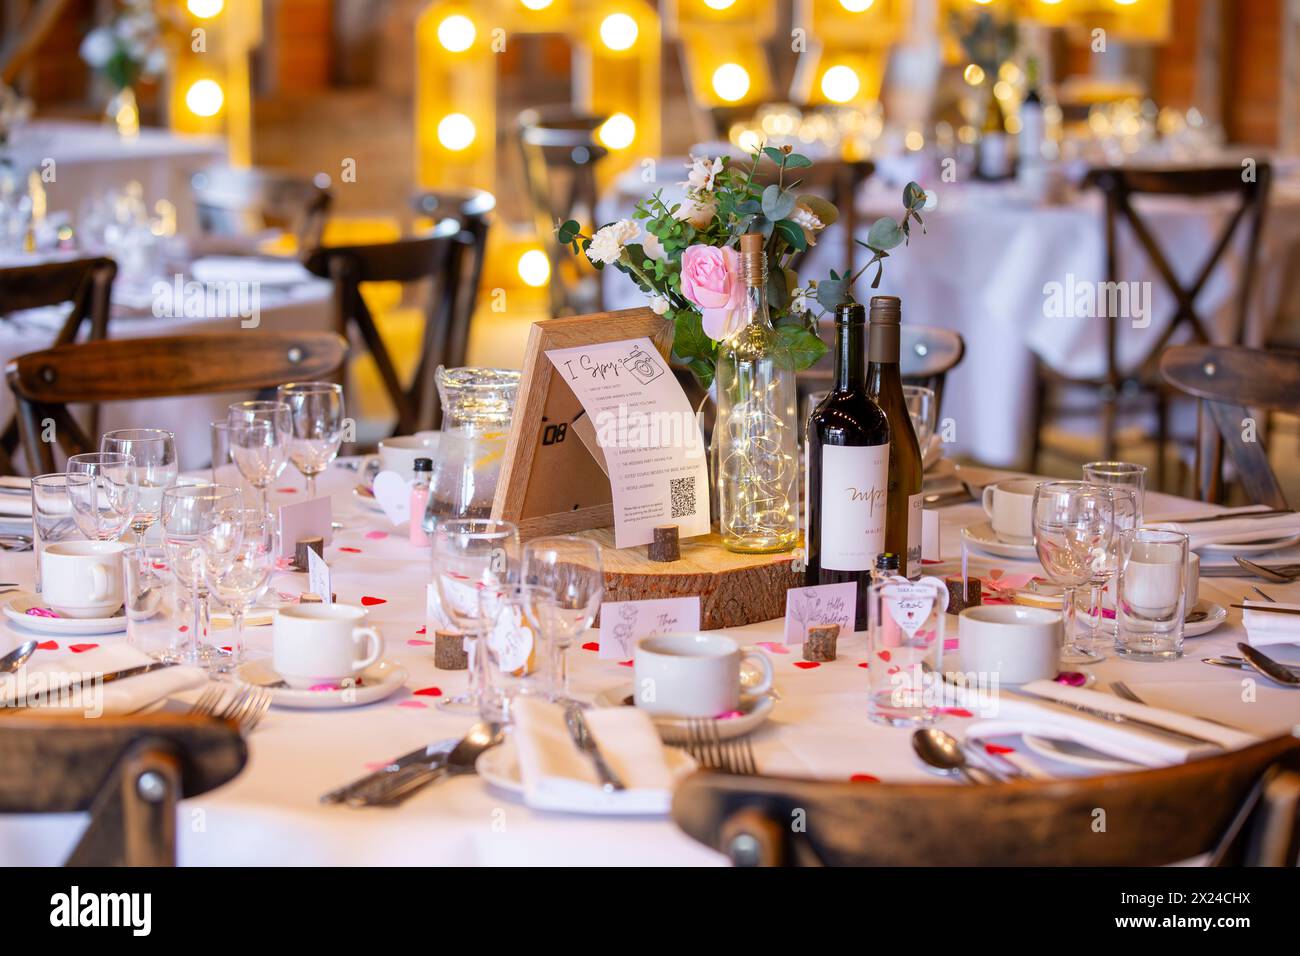 Wedding centrepiece featuring 'I Spy' game, artificial flowers, wine and LED lights in a bottle Stock Photo